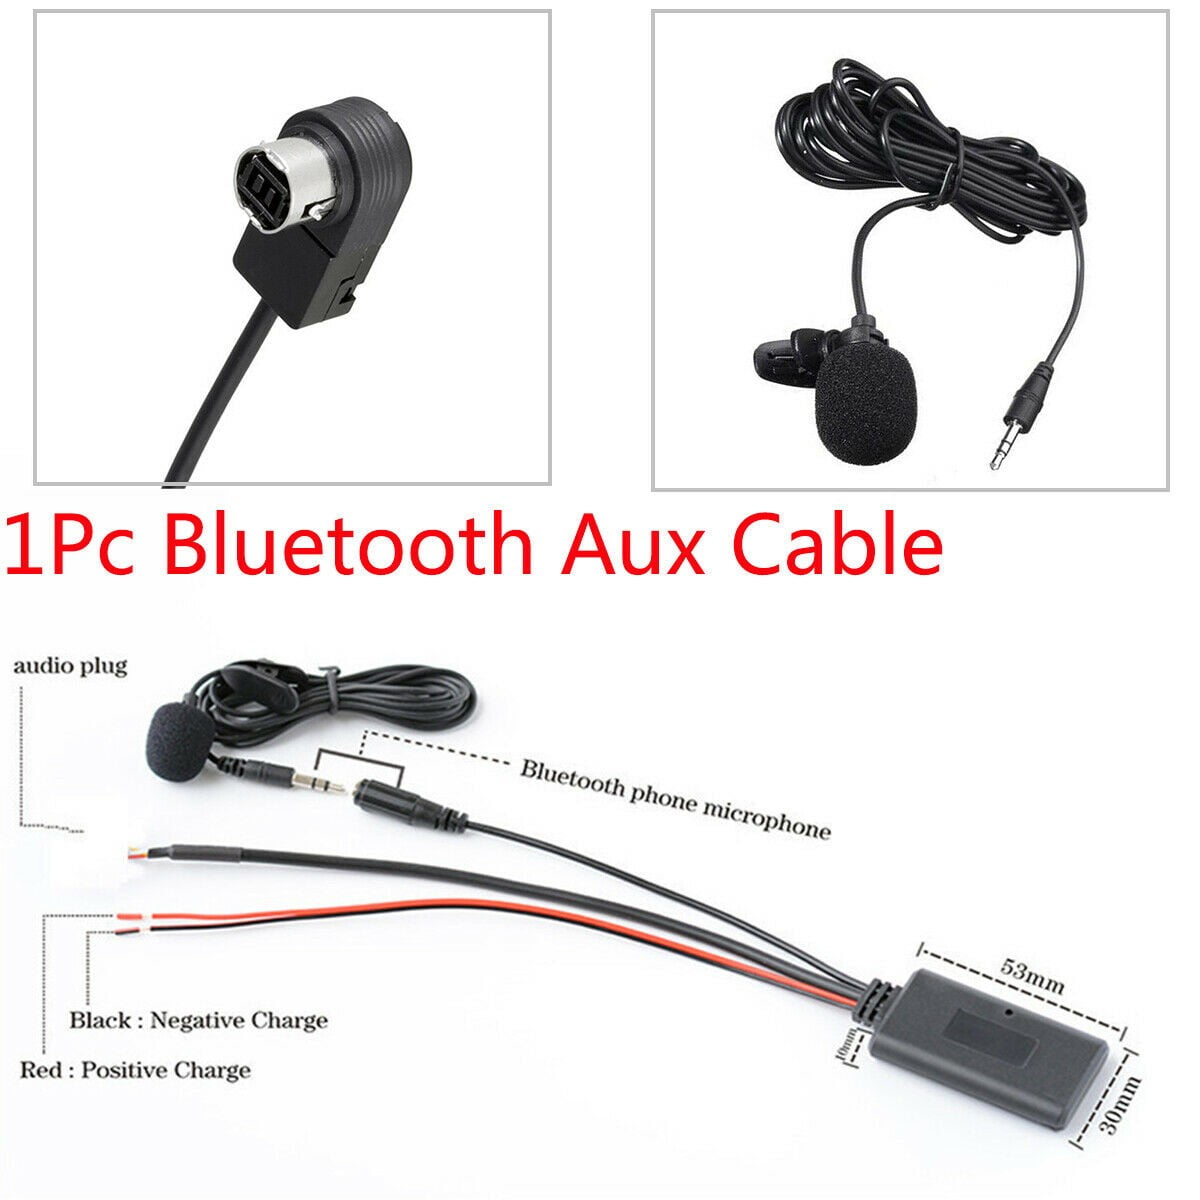 NEW SONY UNILINK CAR STEREO AUX INPUT ADAPTER + BLUETOOTH 5.0 ADAPTER RCA  AUDIO